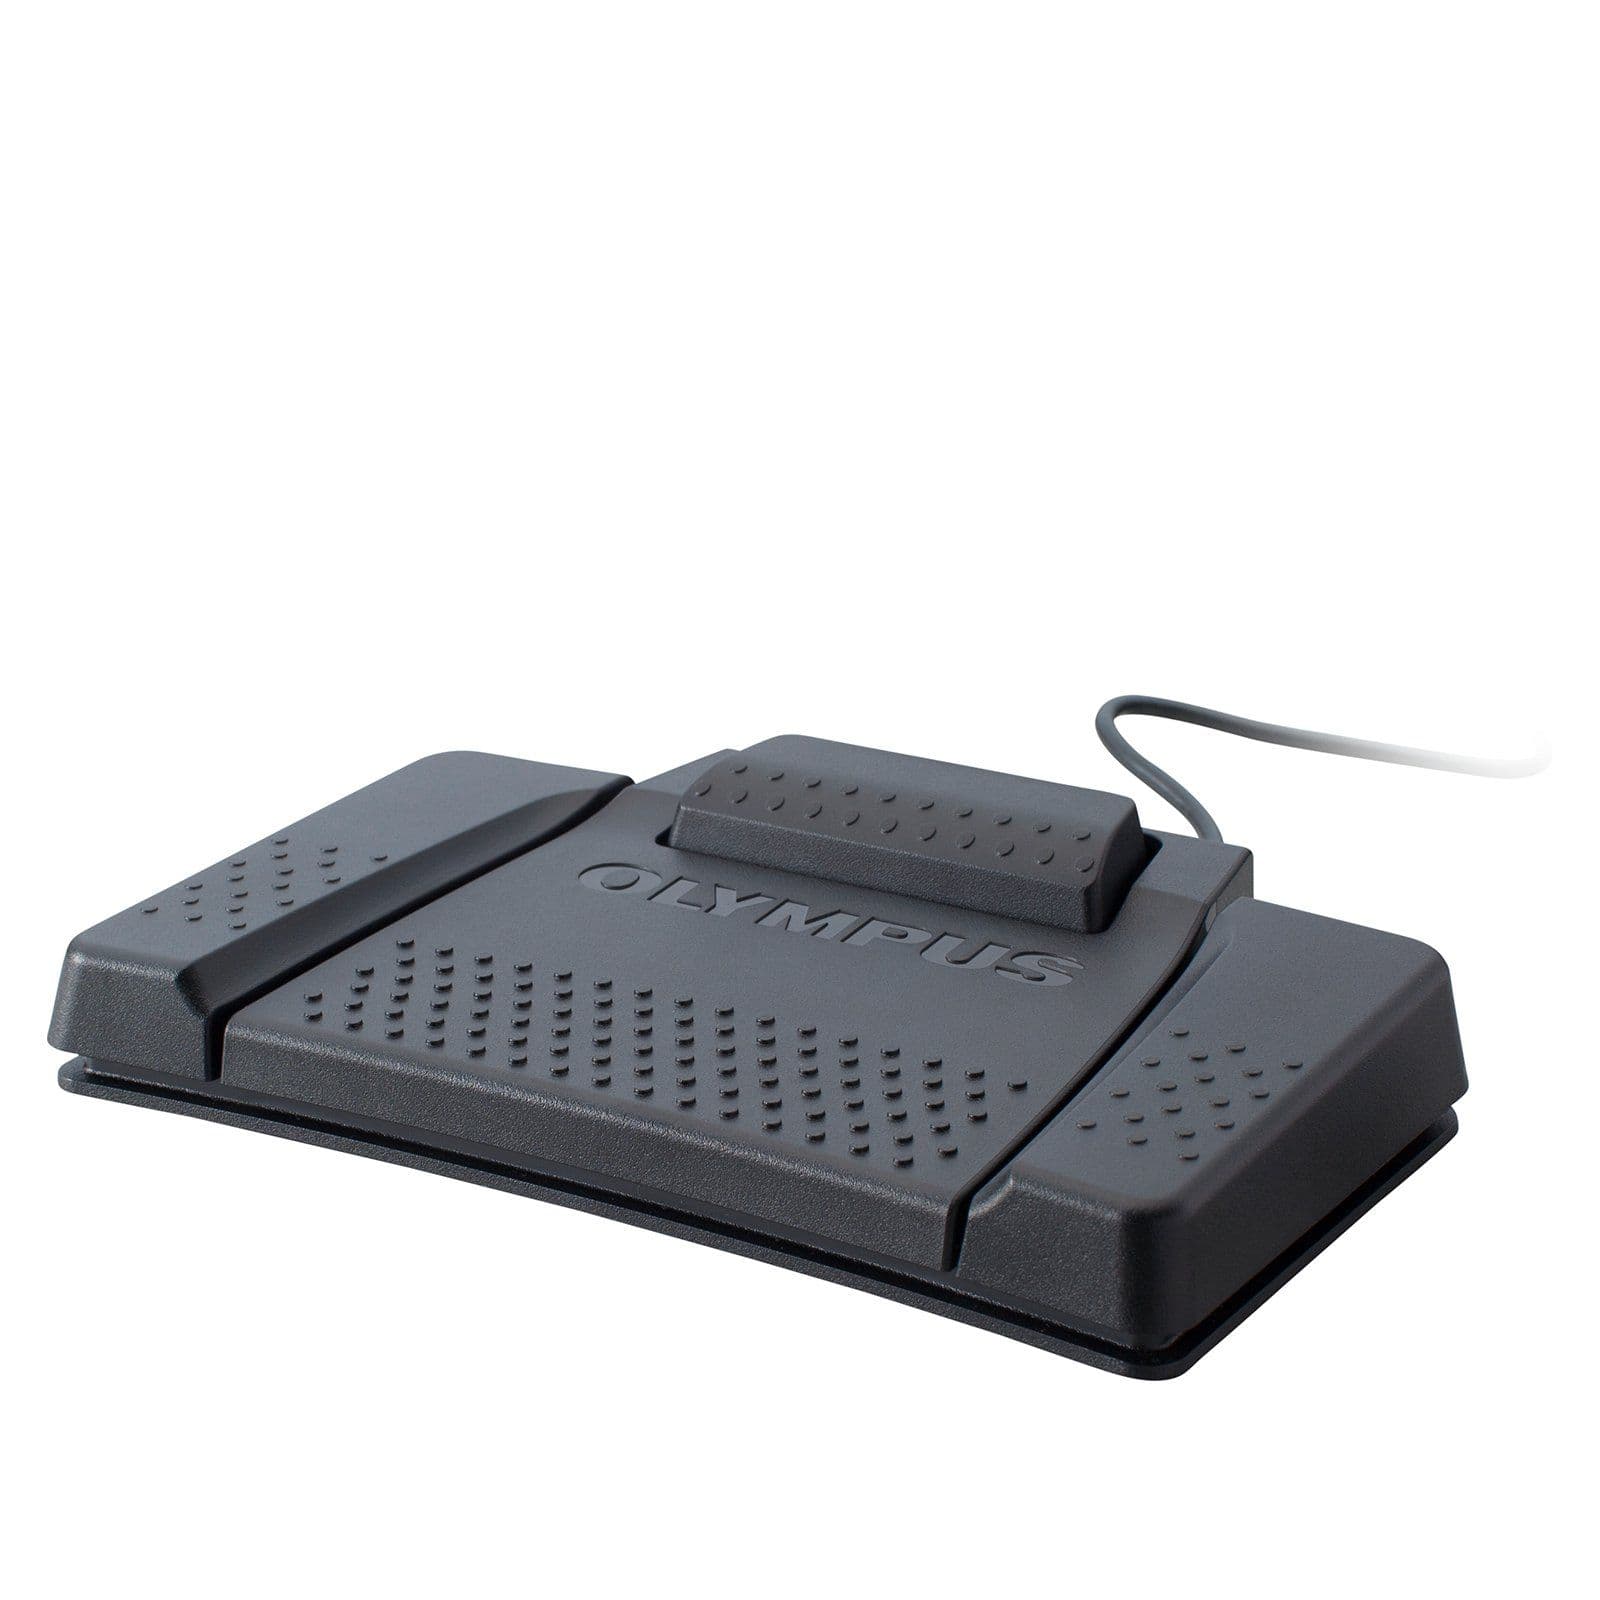 Olympus RS-31 USB Foot Control Pedal RS31 Refurbished